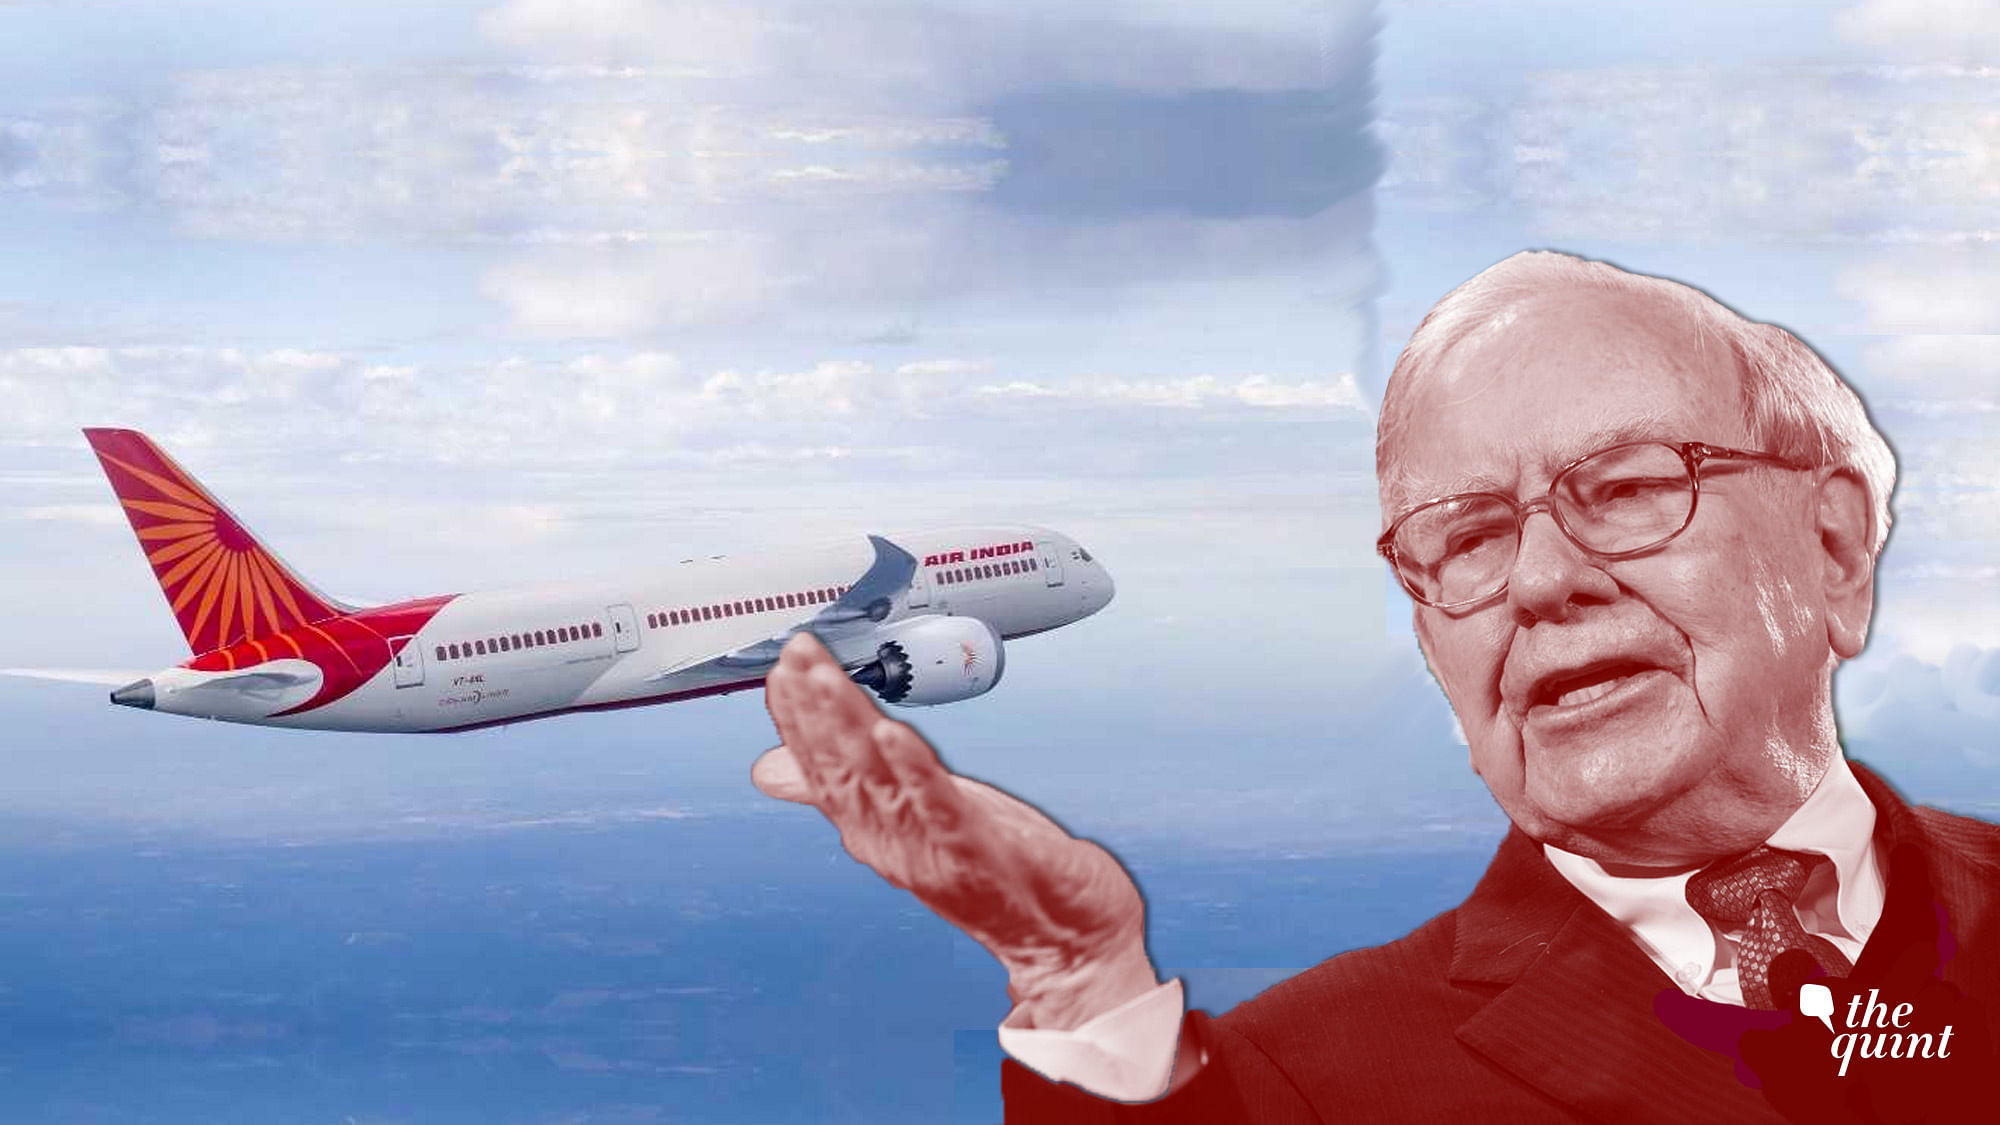 Image of Air India aircraft and billionaire tycoon Warren Buffet, used for representational purposes.